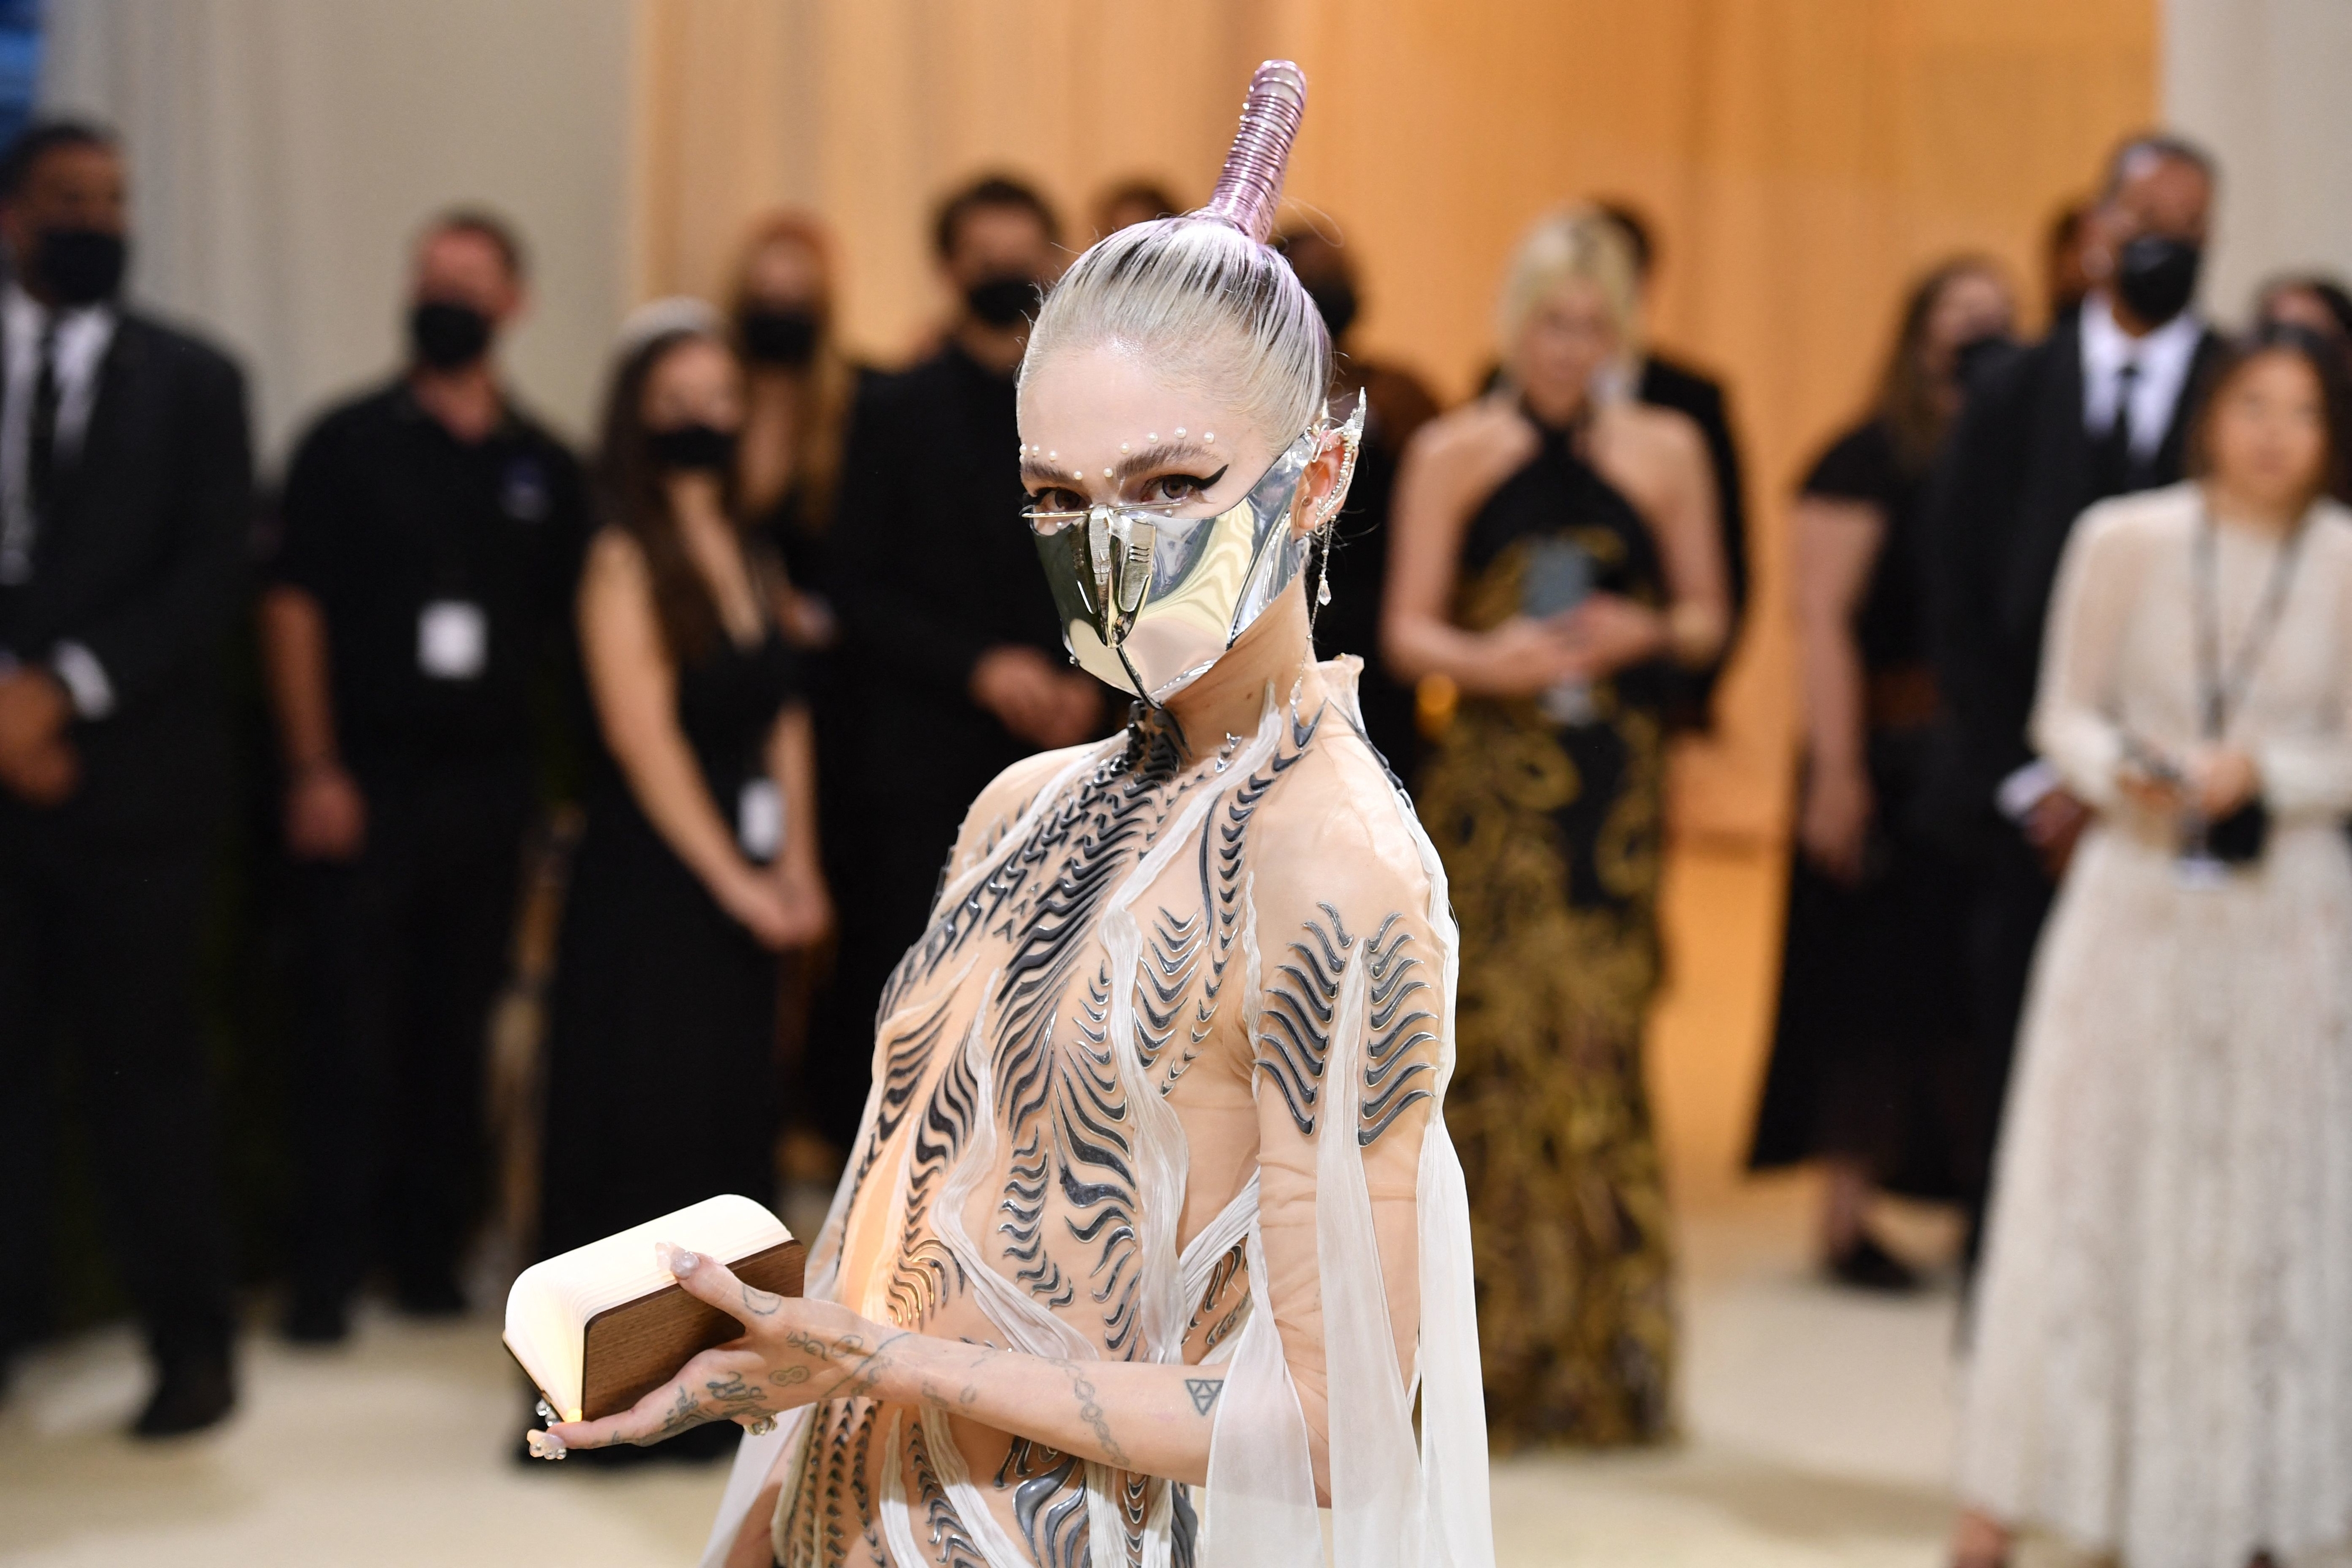 Grimes wearing a metallic mask and a sheer gown with a wavy design, holding a sword at Met Gala